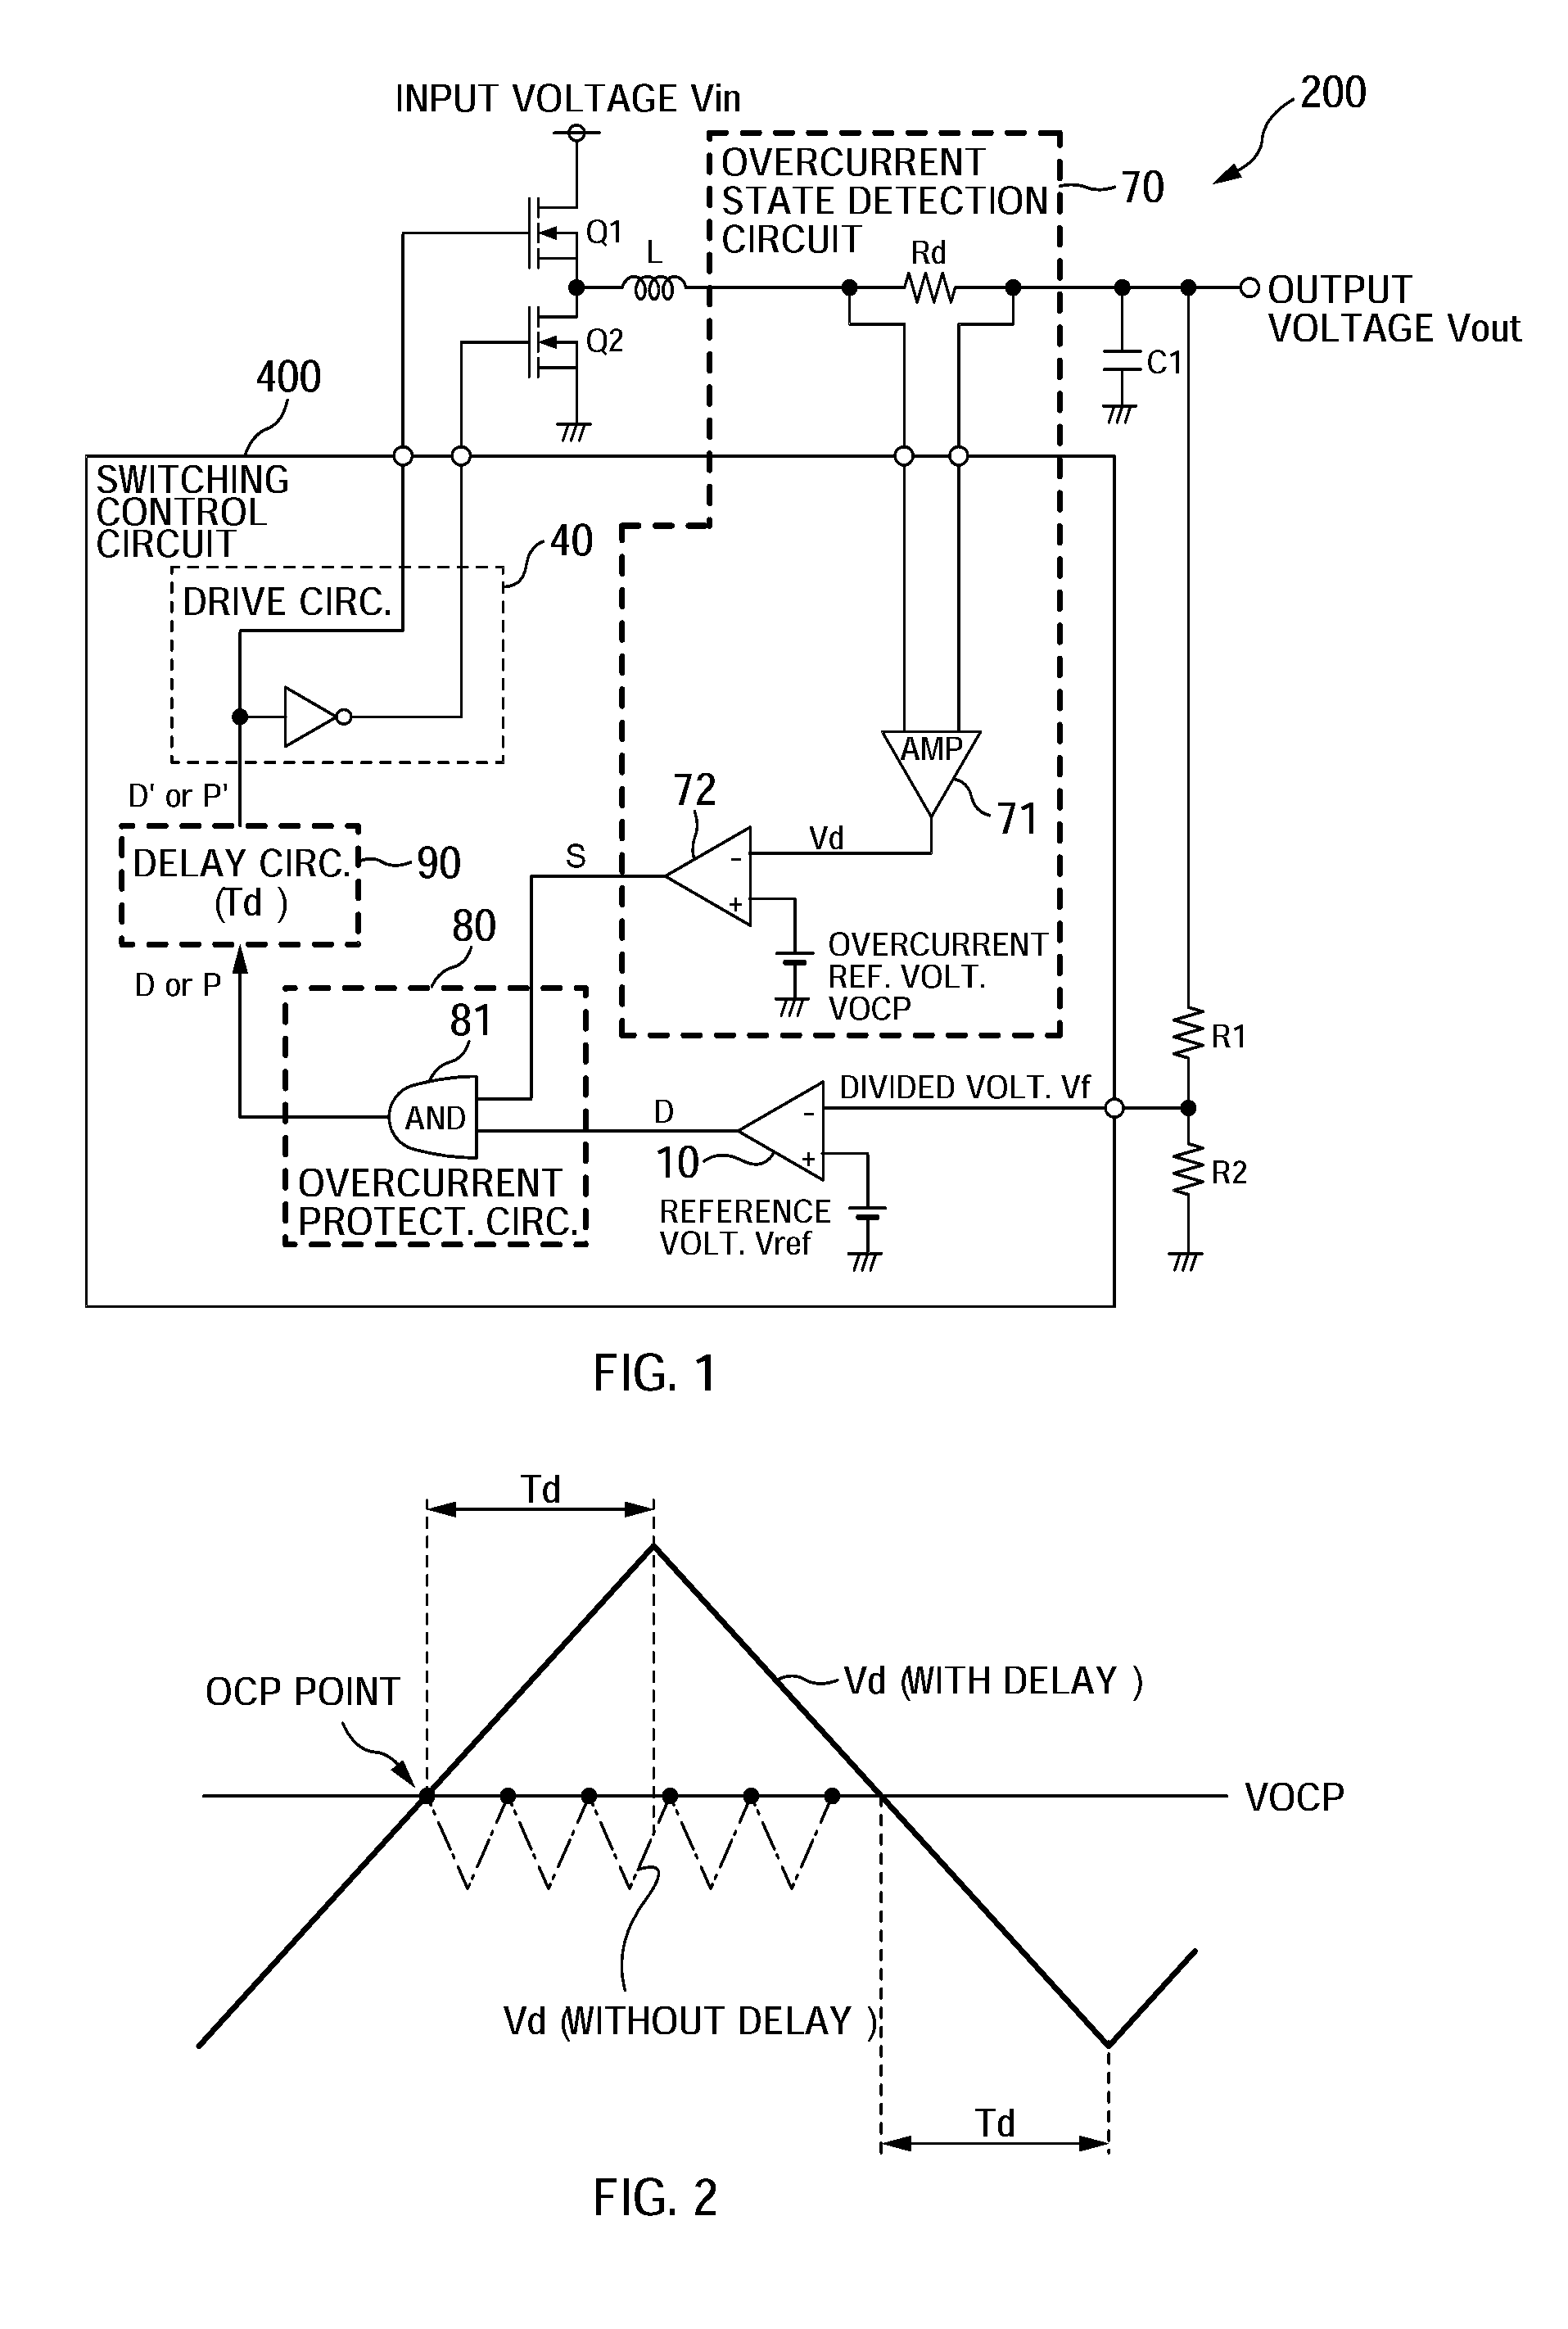 Switching Control Circuit and Self-Excited DC-DC Converter